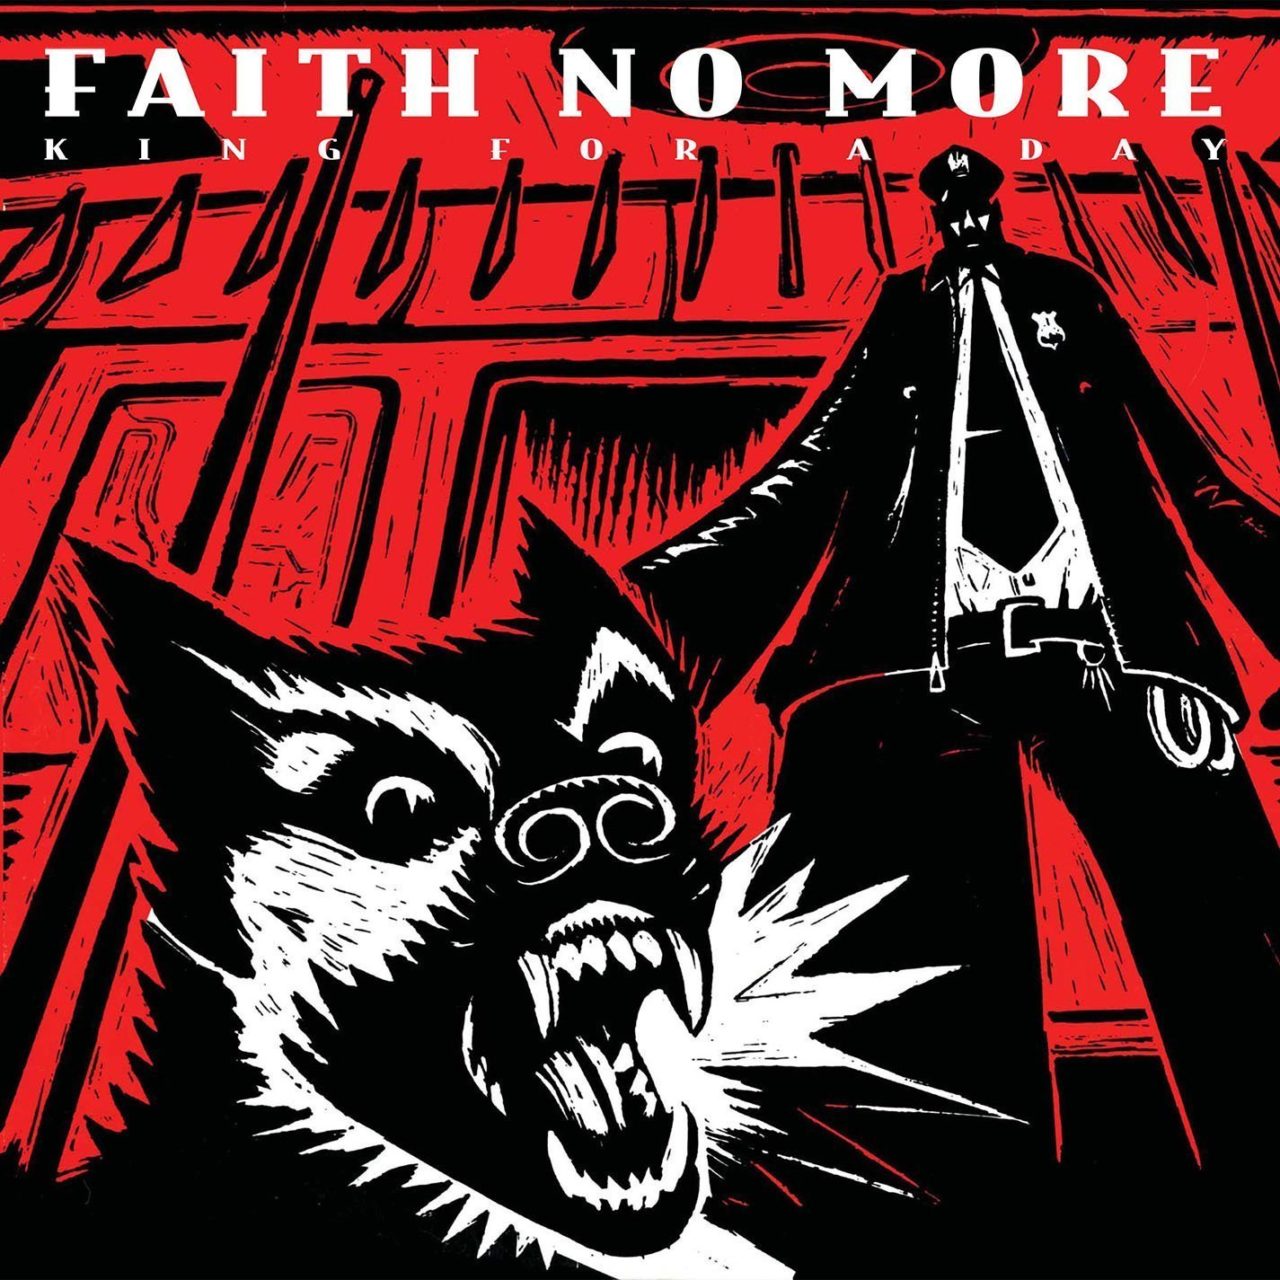 Faith No More - Digging the grave